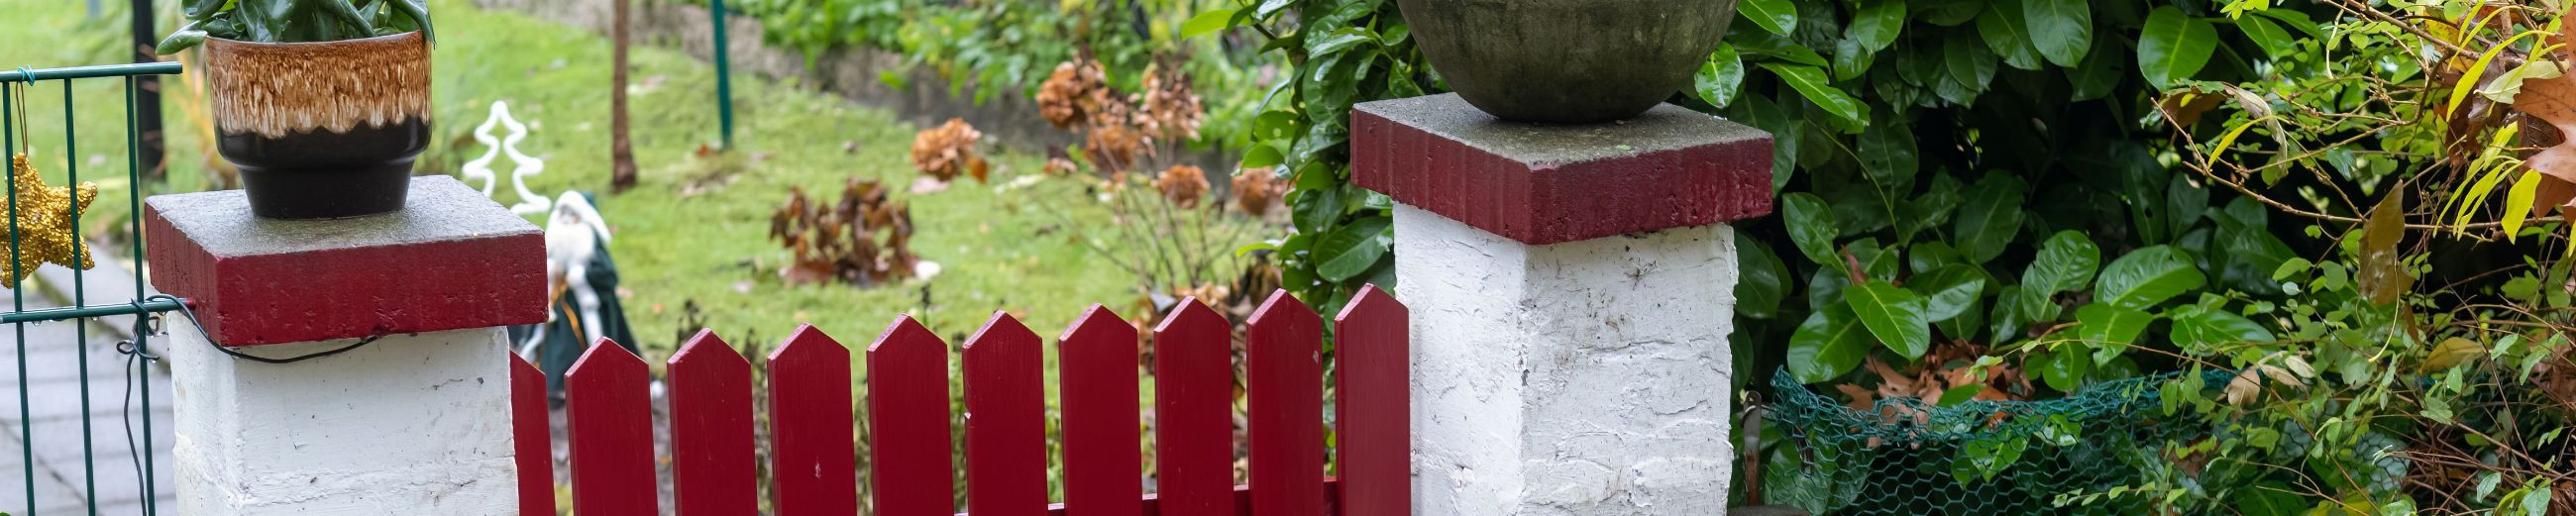 We specialize in crafting and installing a variety of fences tailored to our clients' needs and architectural styles.